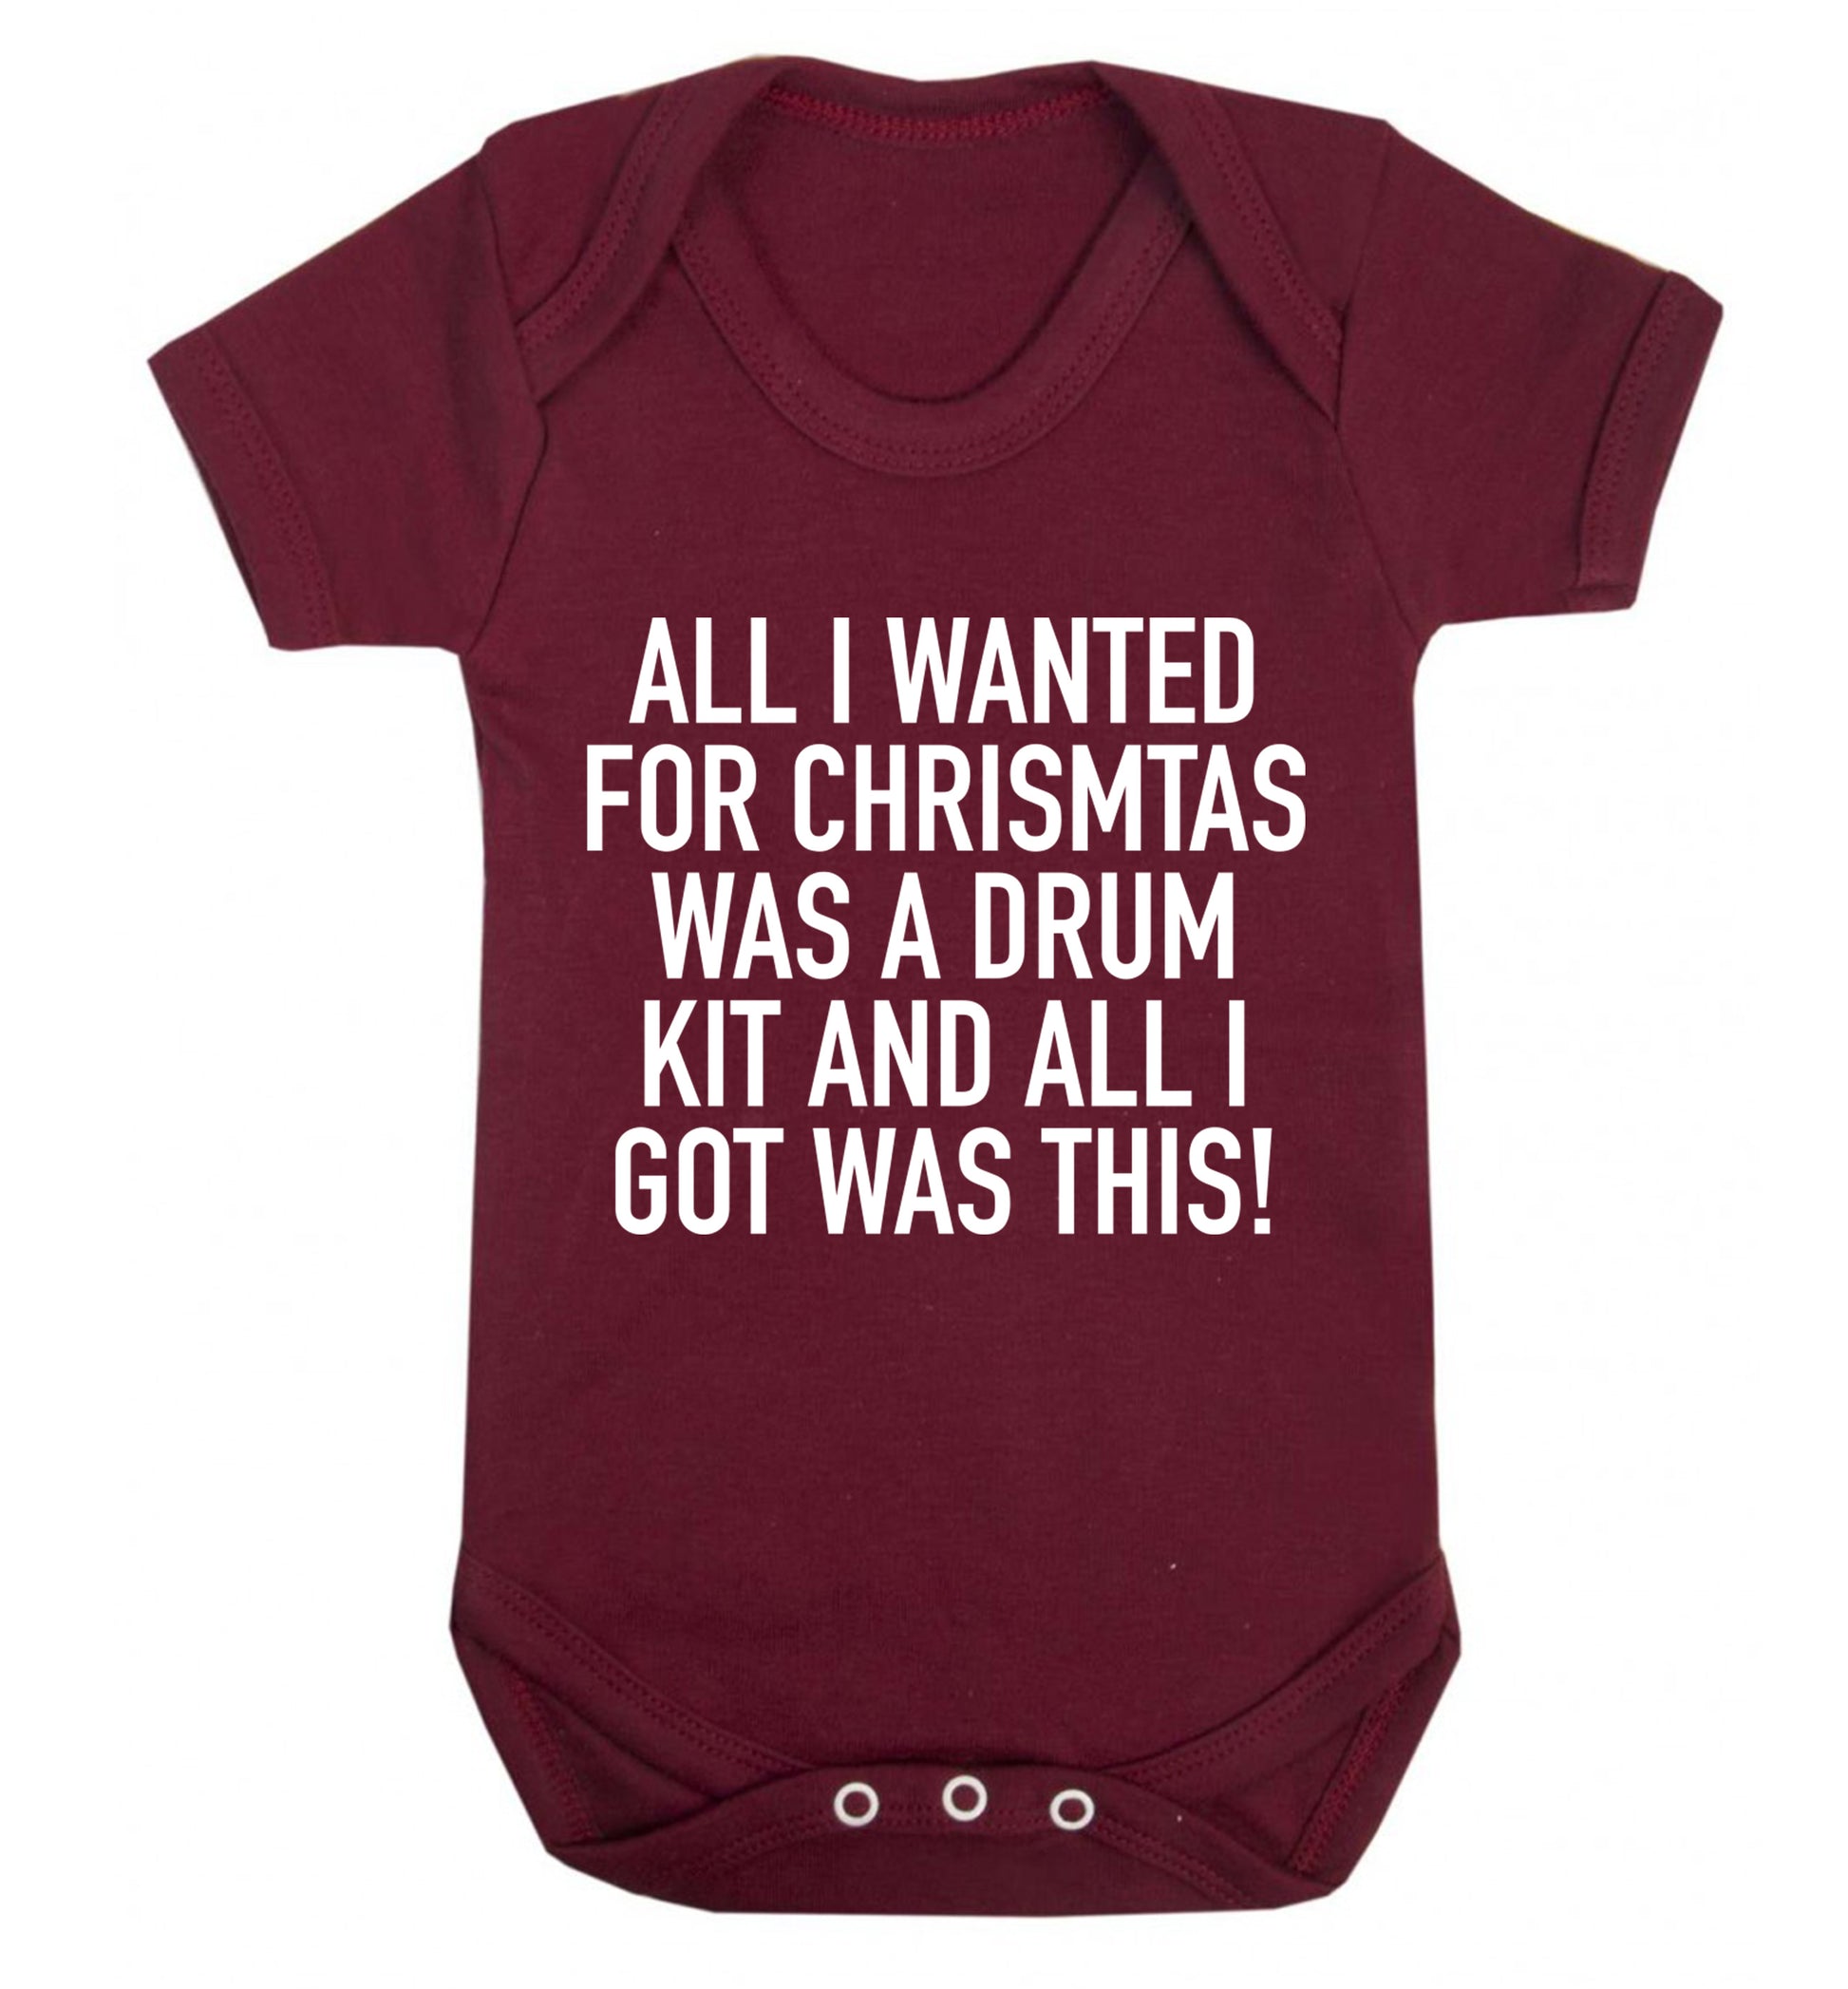 All I wanted for Christmas was a drum kit and all I got was this! Baby Vest maroon 18-24 months